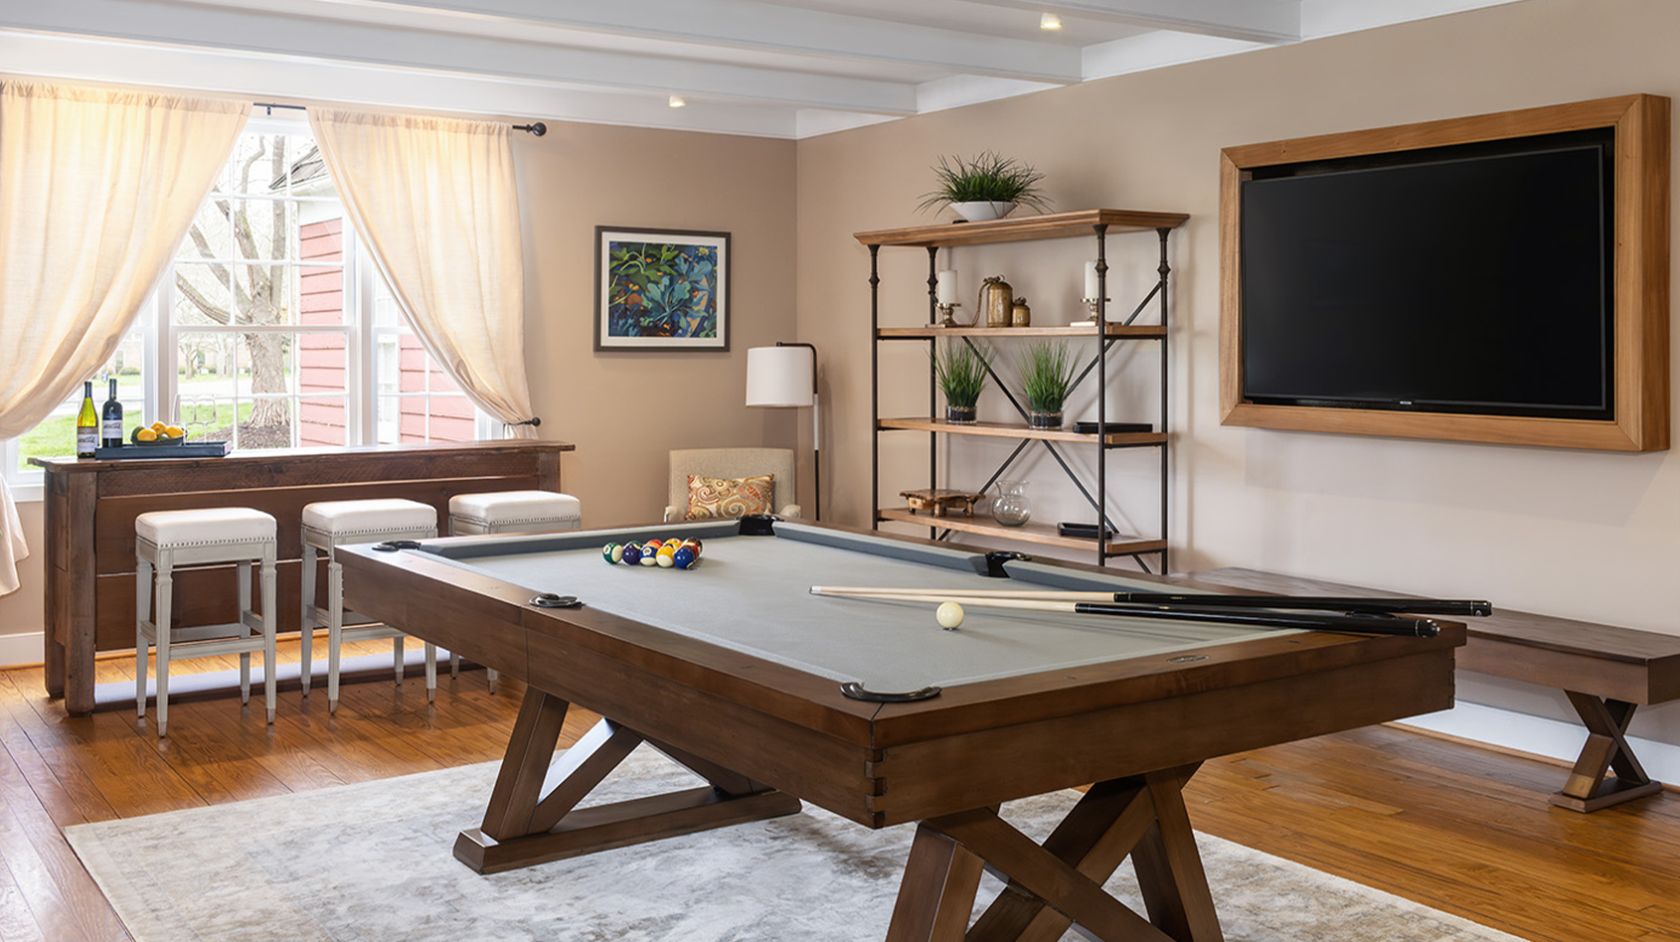 A Pool Table In A Room